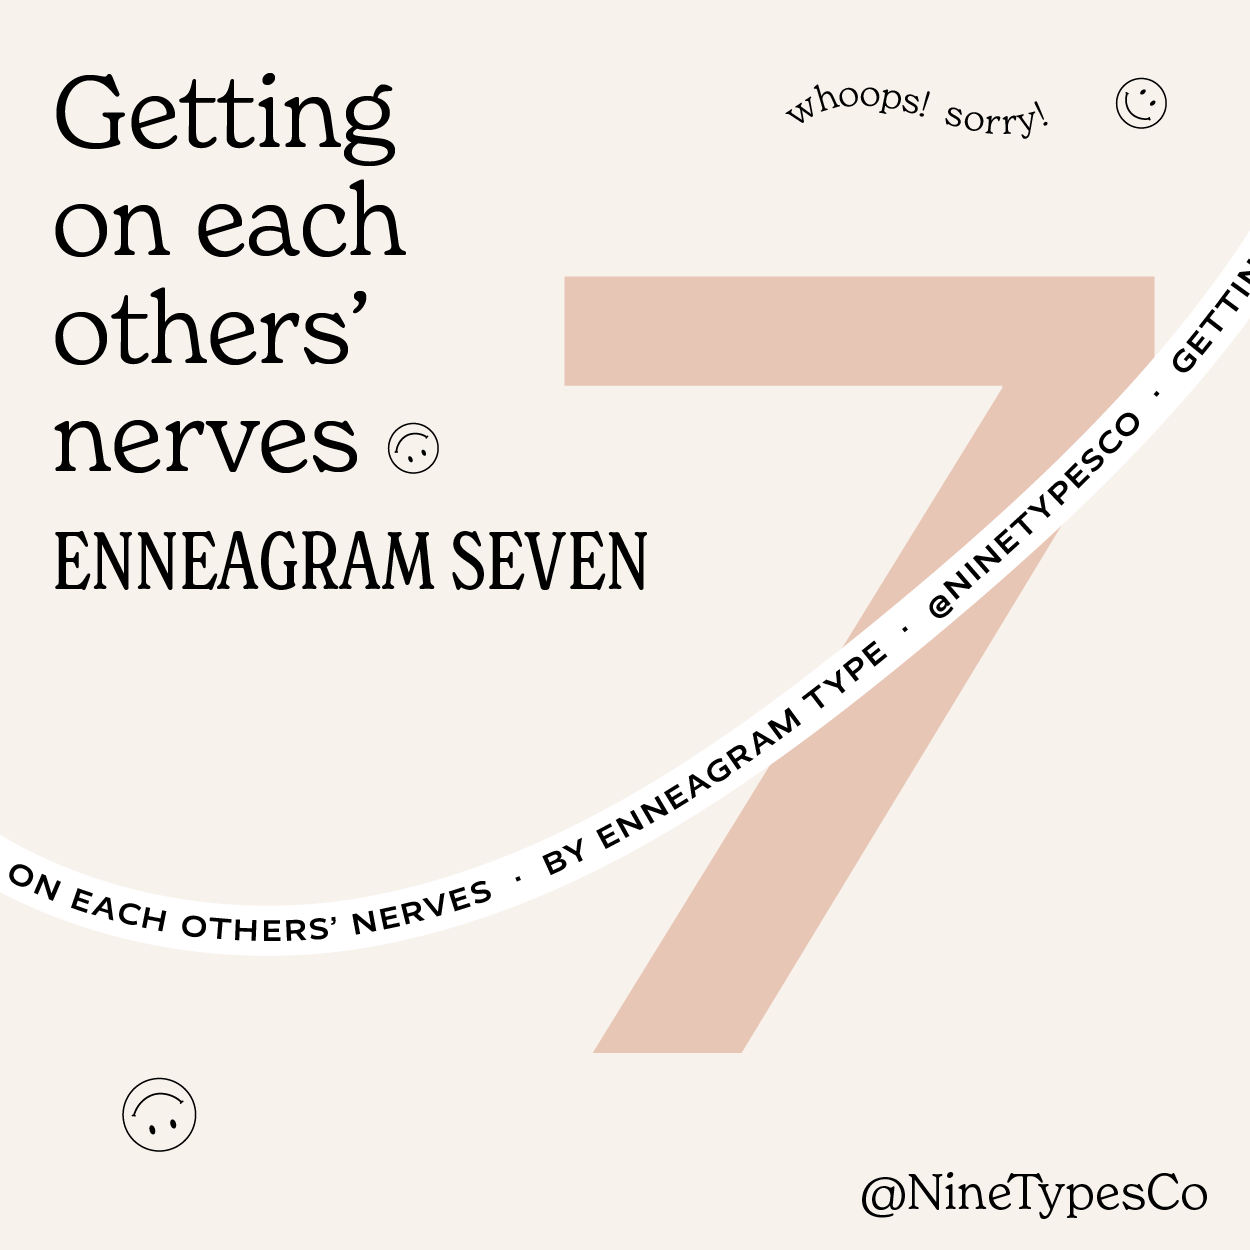 Getting on each others’ nerves by Enneagram TypeEnneagram 7@0.5x.png